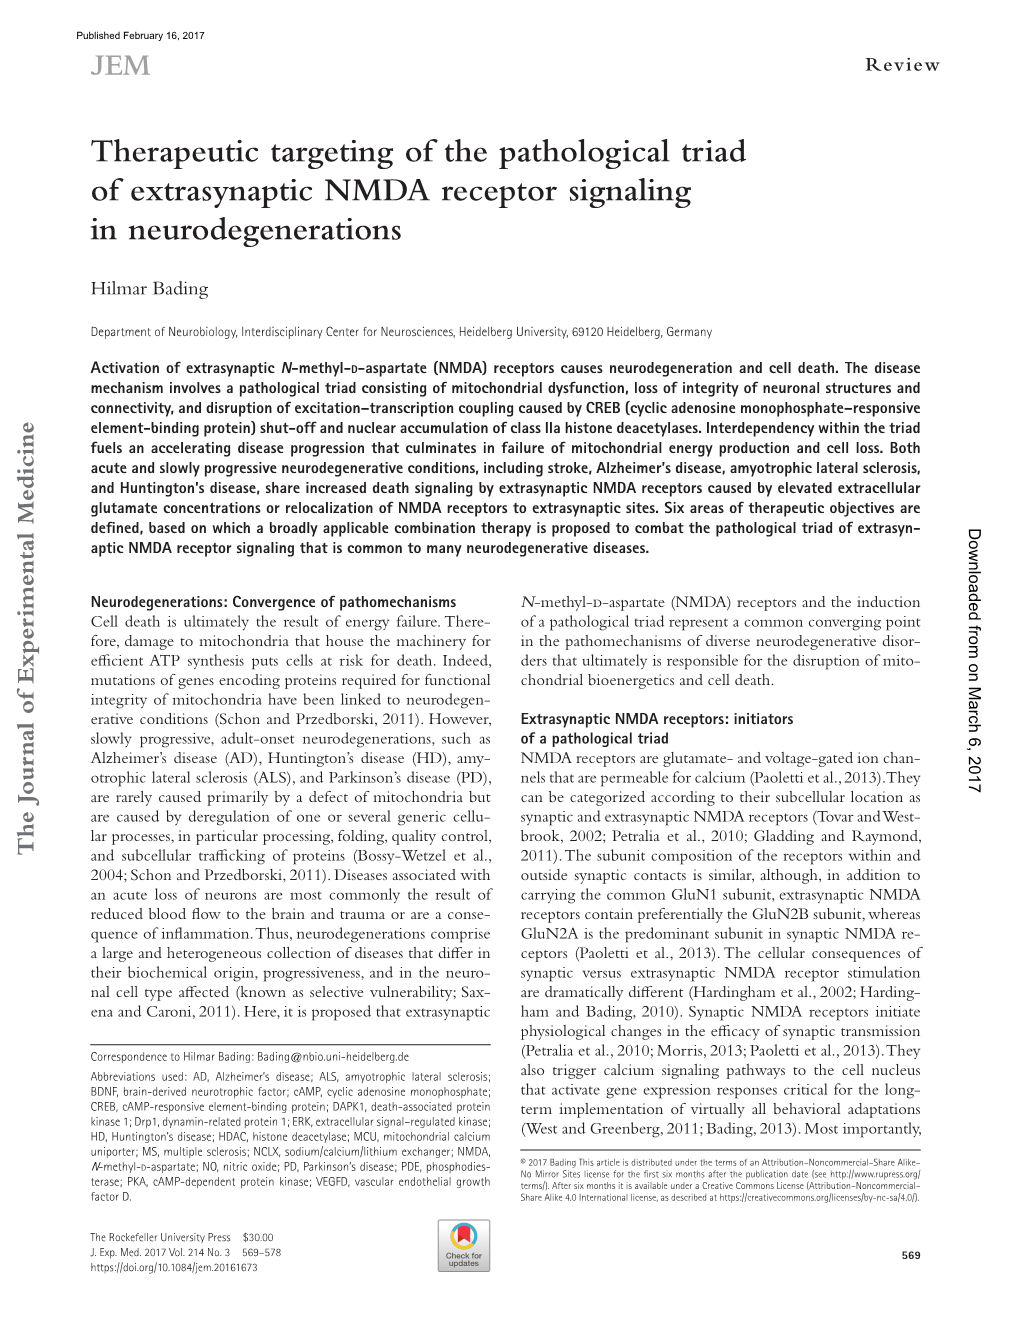 Therapeutic Targeting of the Pathological Triad of Extrasynaptic NMDA Receptor Signaling in Neurodegenerations